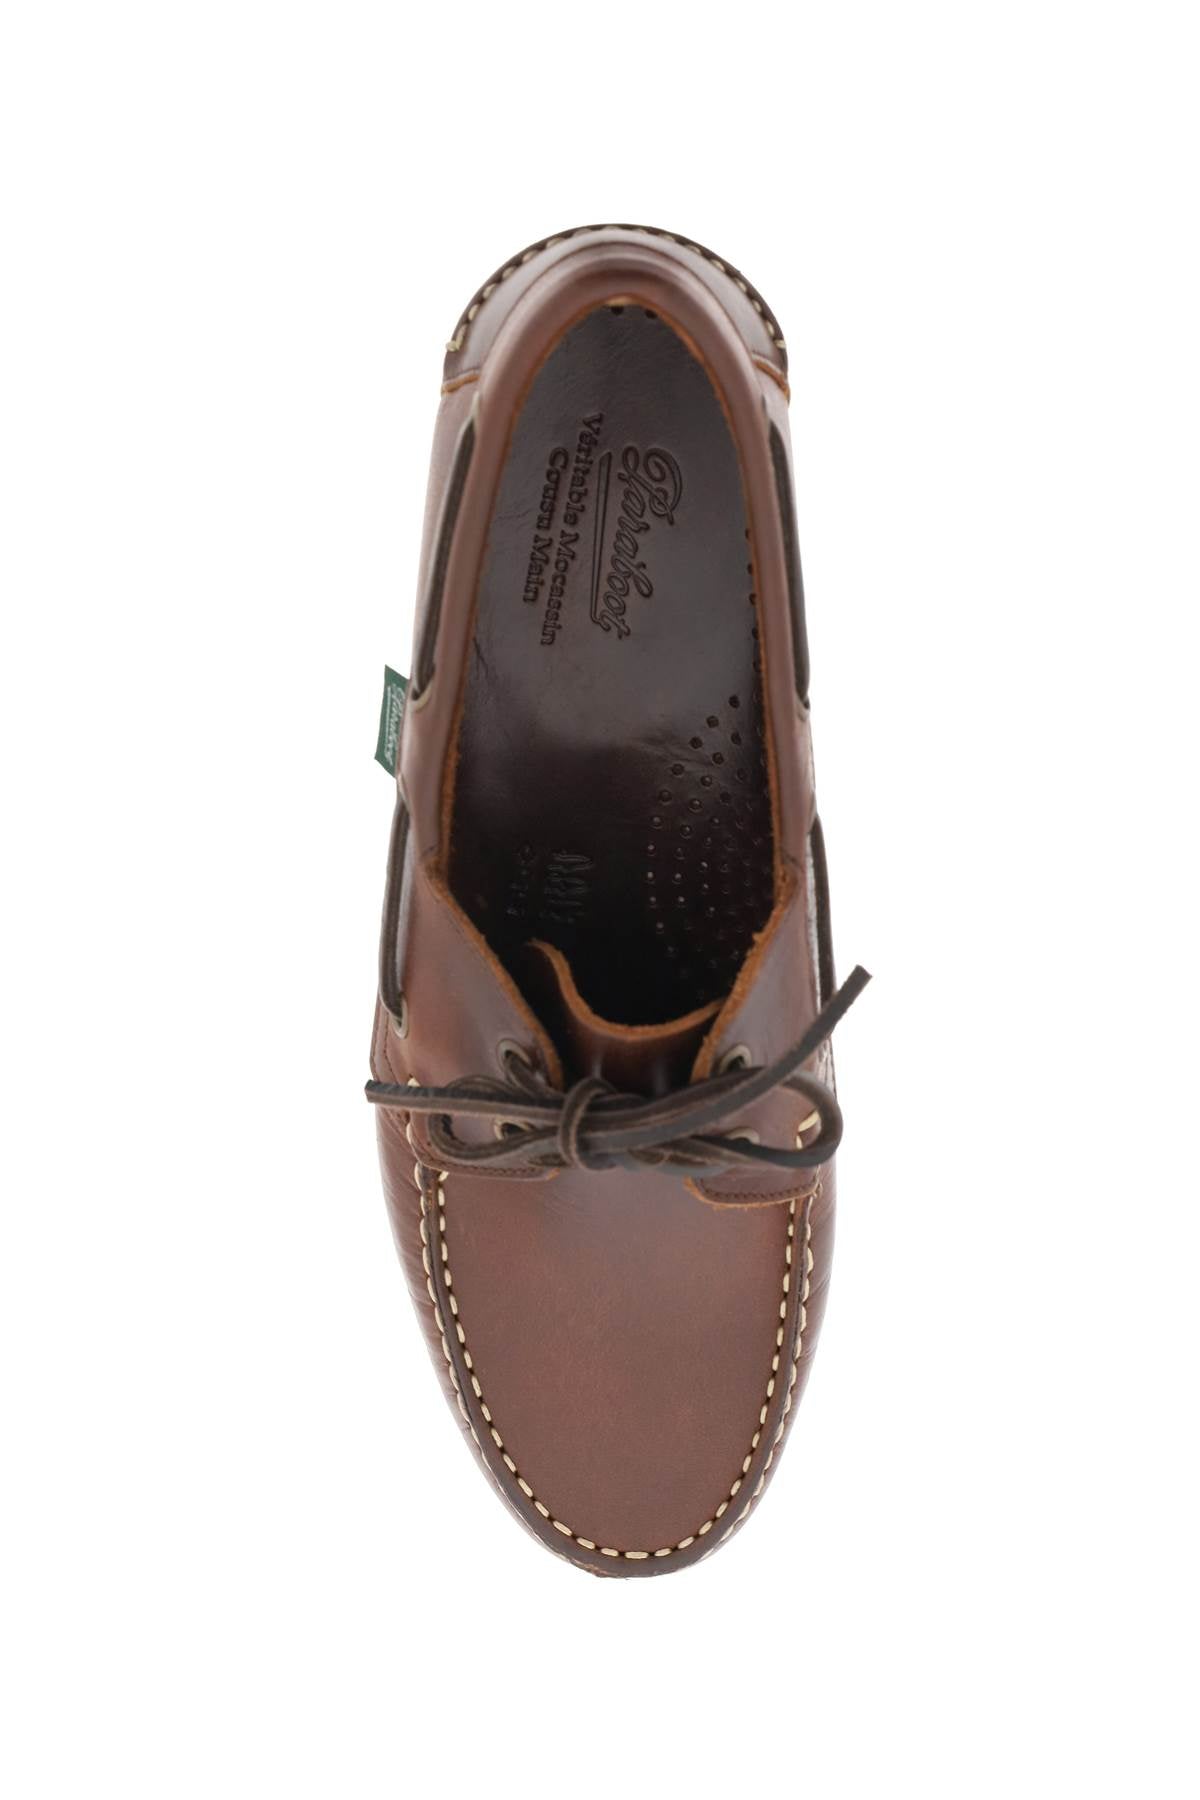 barth loafers-1